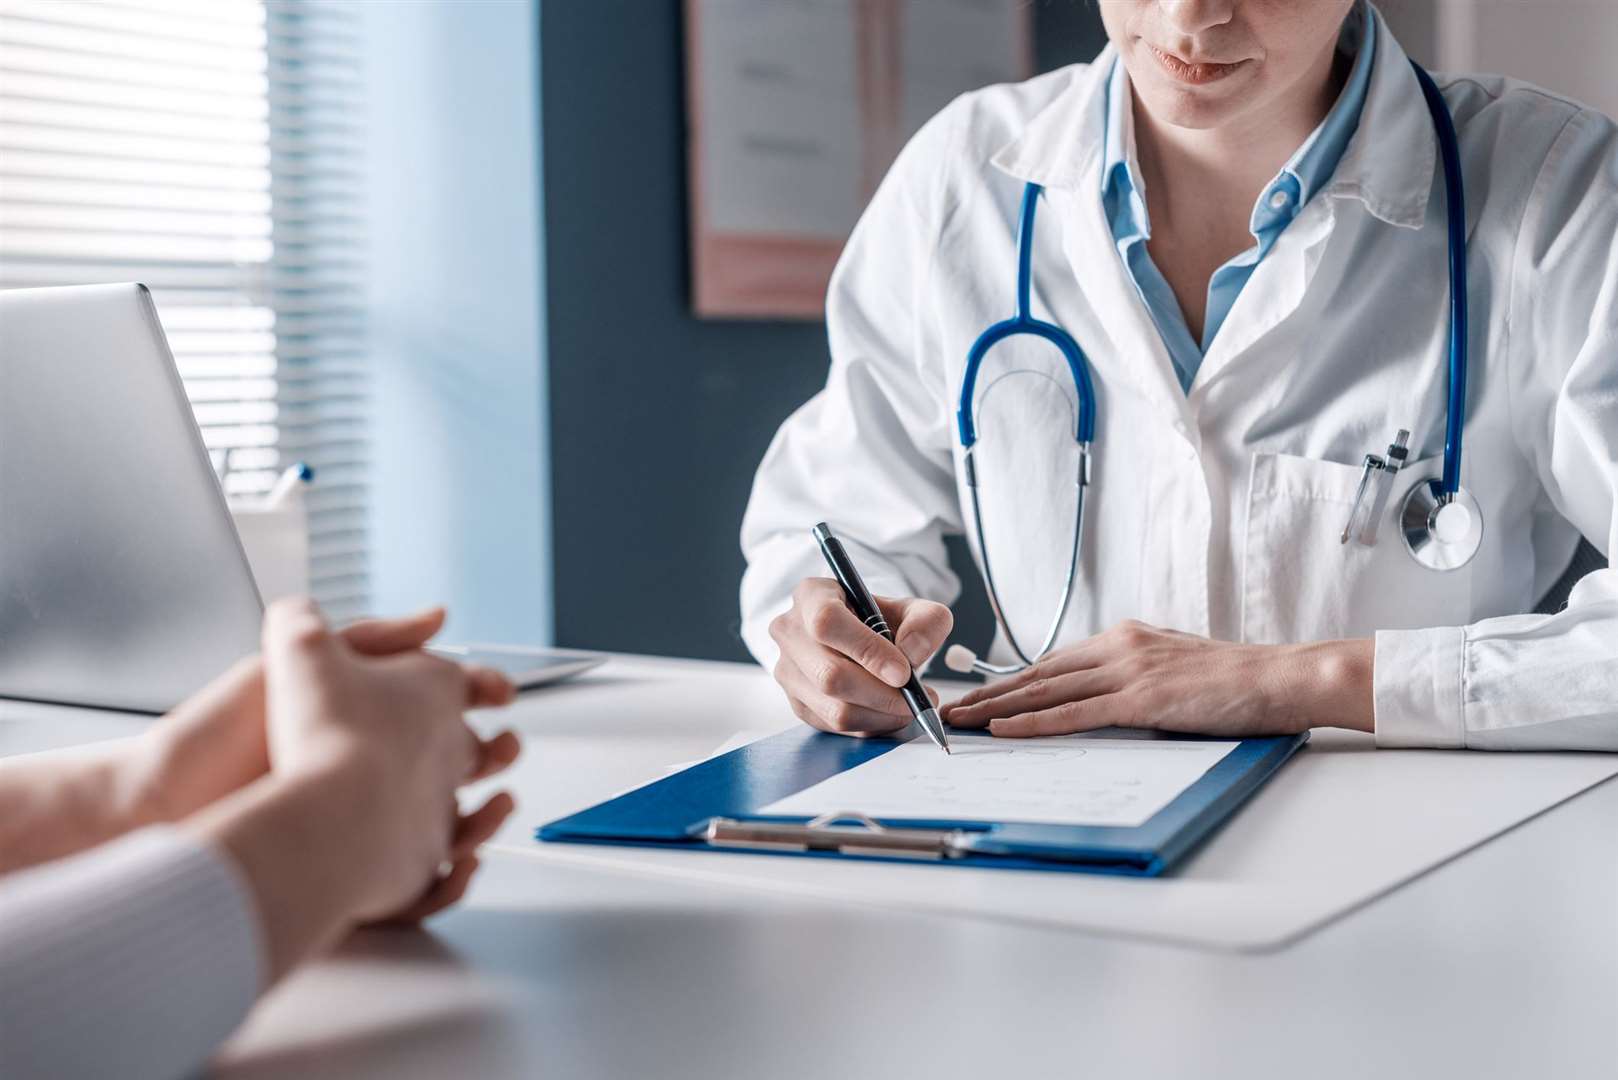 Ashford GP Dr Jack Jacobs said the 'arbitrary targets' set by the Health Secretary are not the solution to strain on GP services. Picture: istock/demaerre